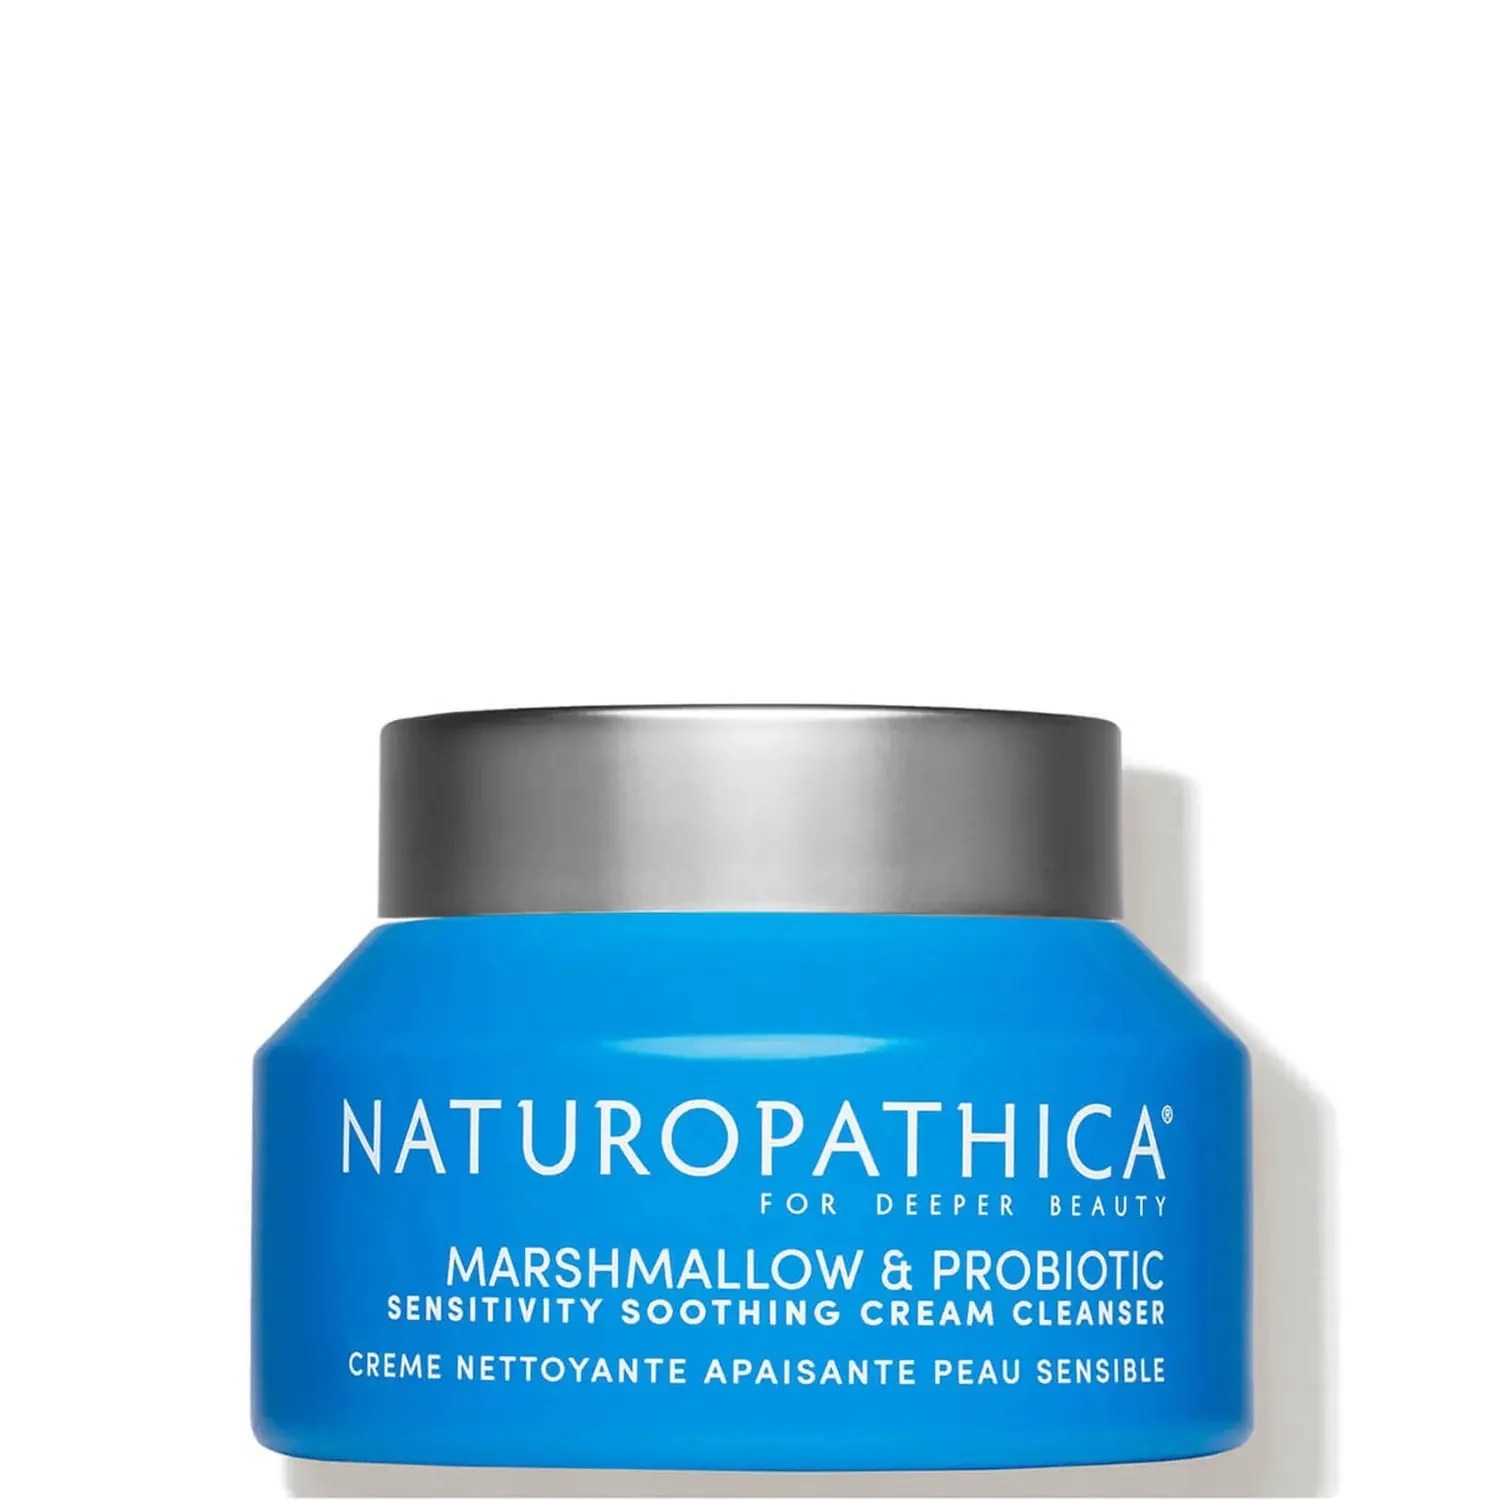 A blue jar of Naturopathica cream cleanser.